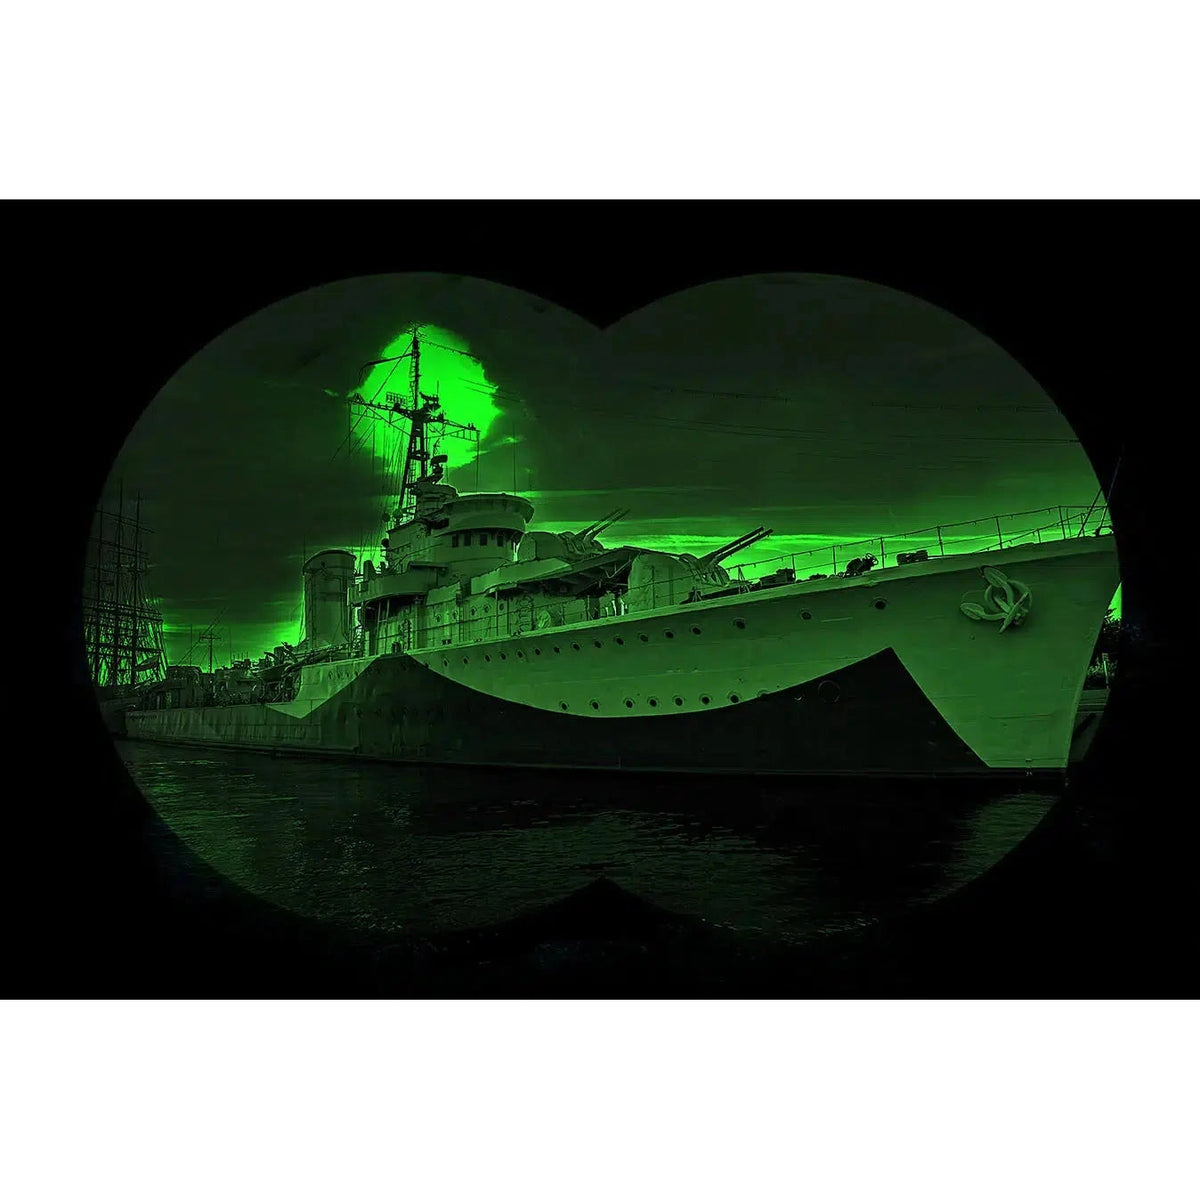 Front view of a ship in the infrared mode.